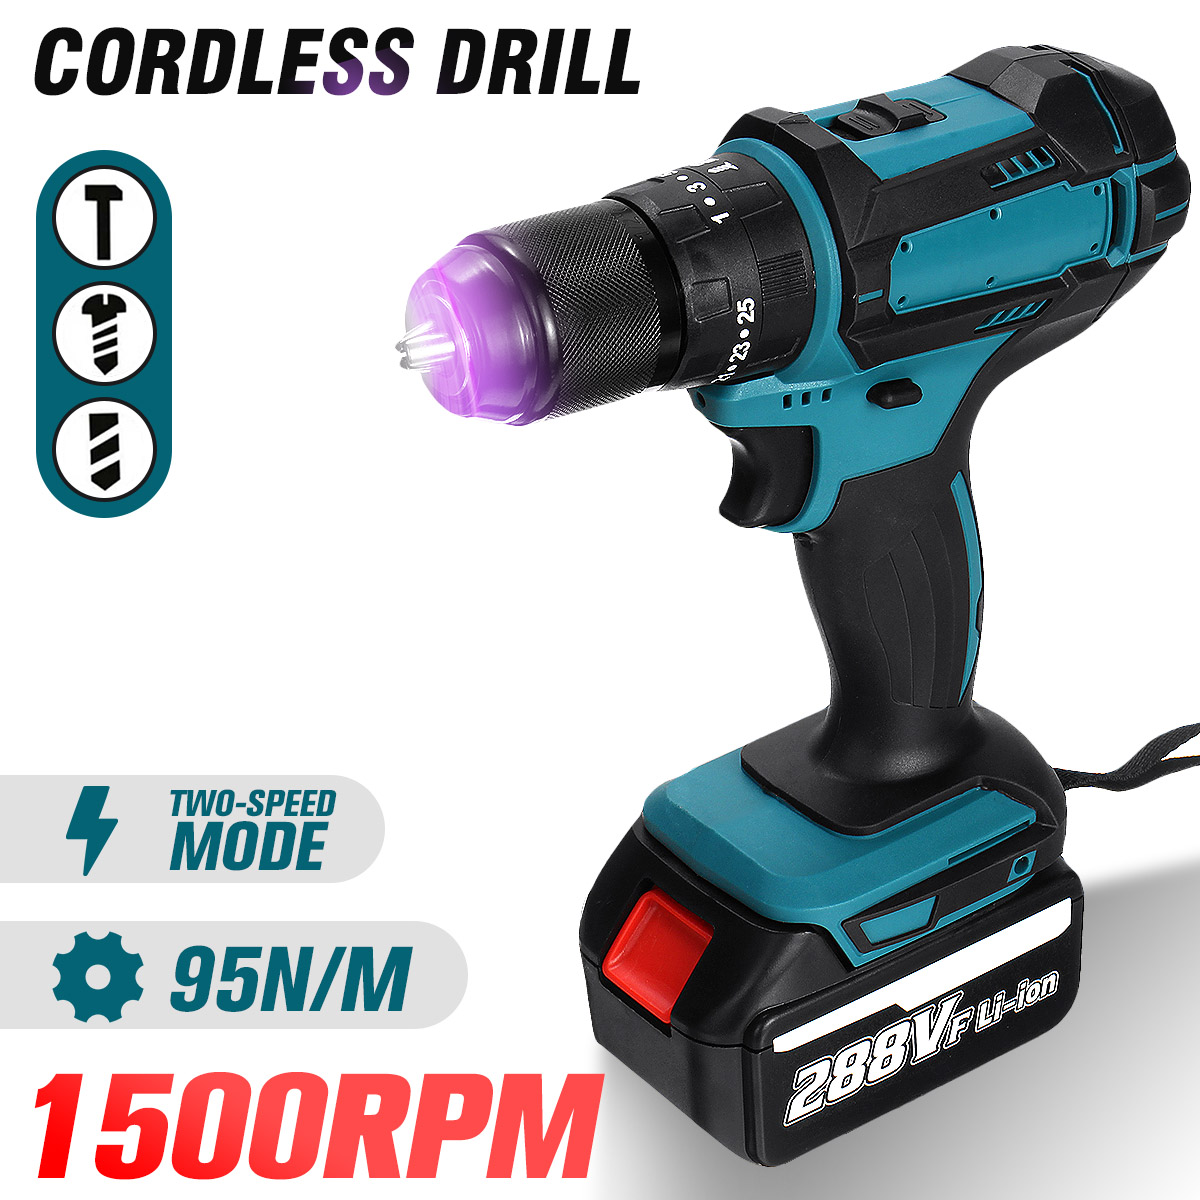 Wolike-13mm-800W-Cordless-Electirc-Impact-Drill-Driver-253-Torque-Electric-Drill-Screwdriver-1880979-1